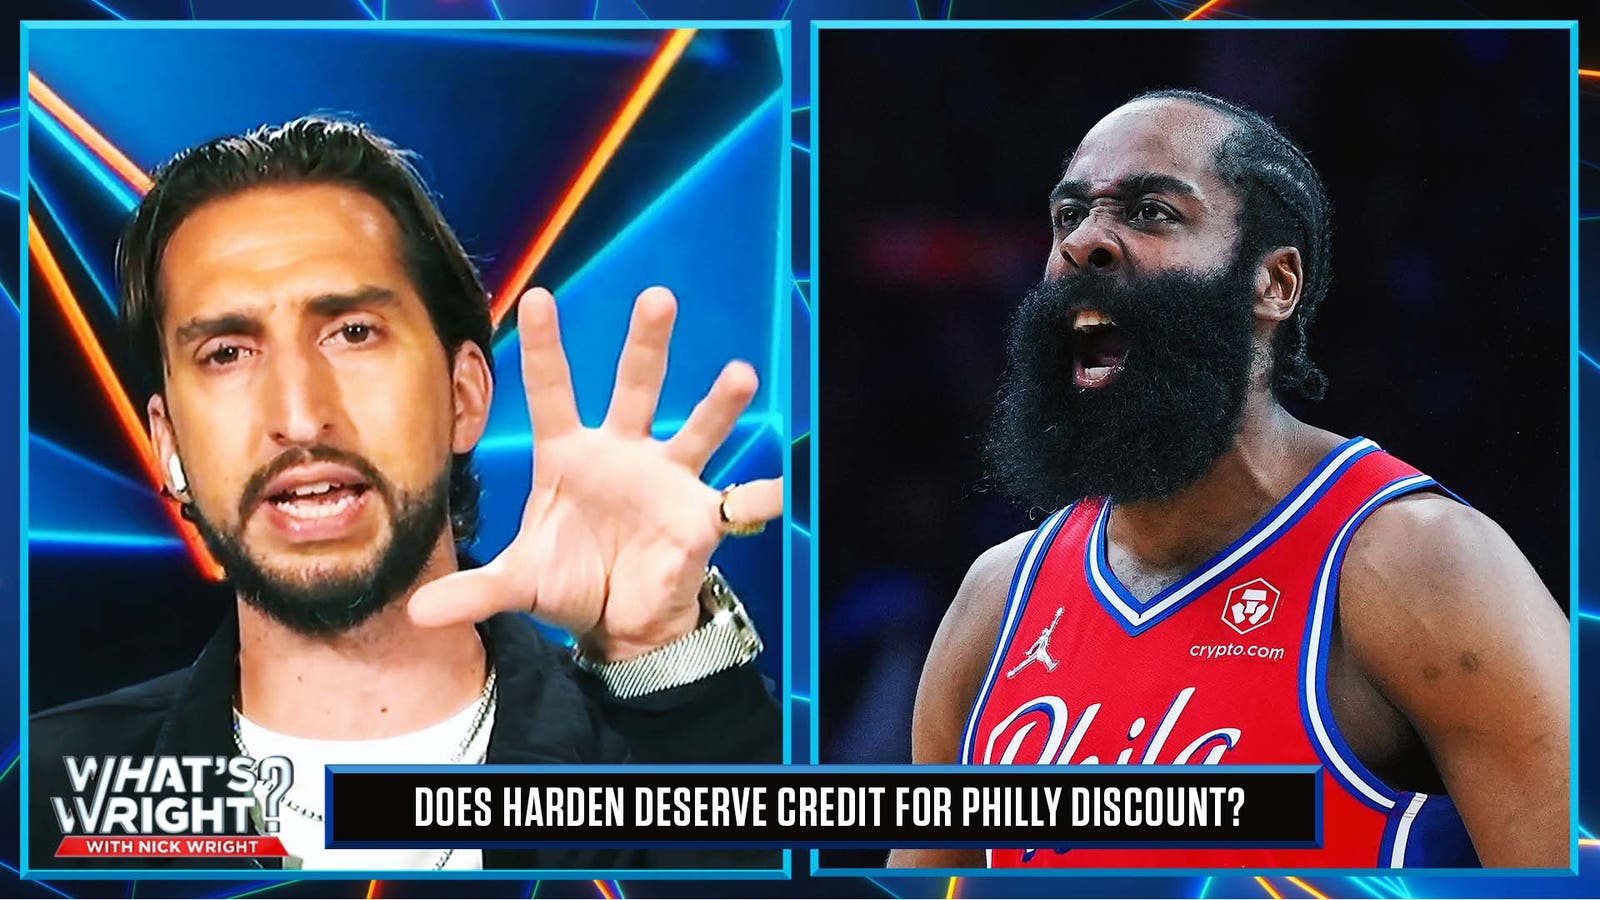 James Harden reportedly agrees to $15M discount with the 76ers and deserves credit